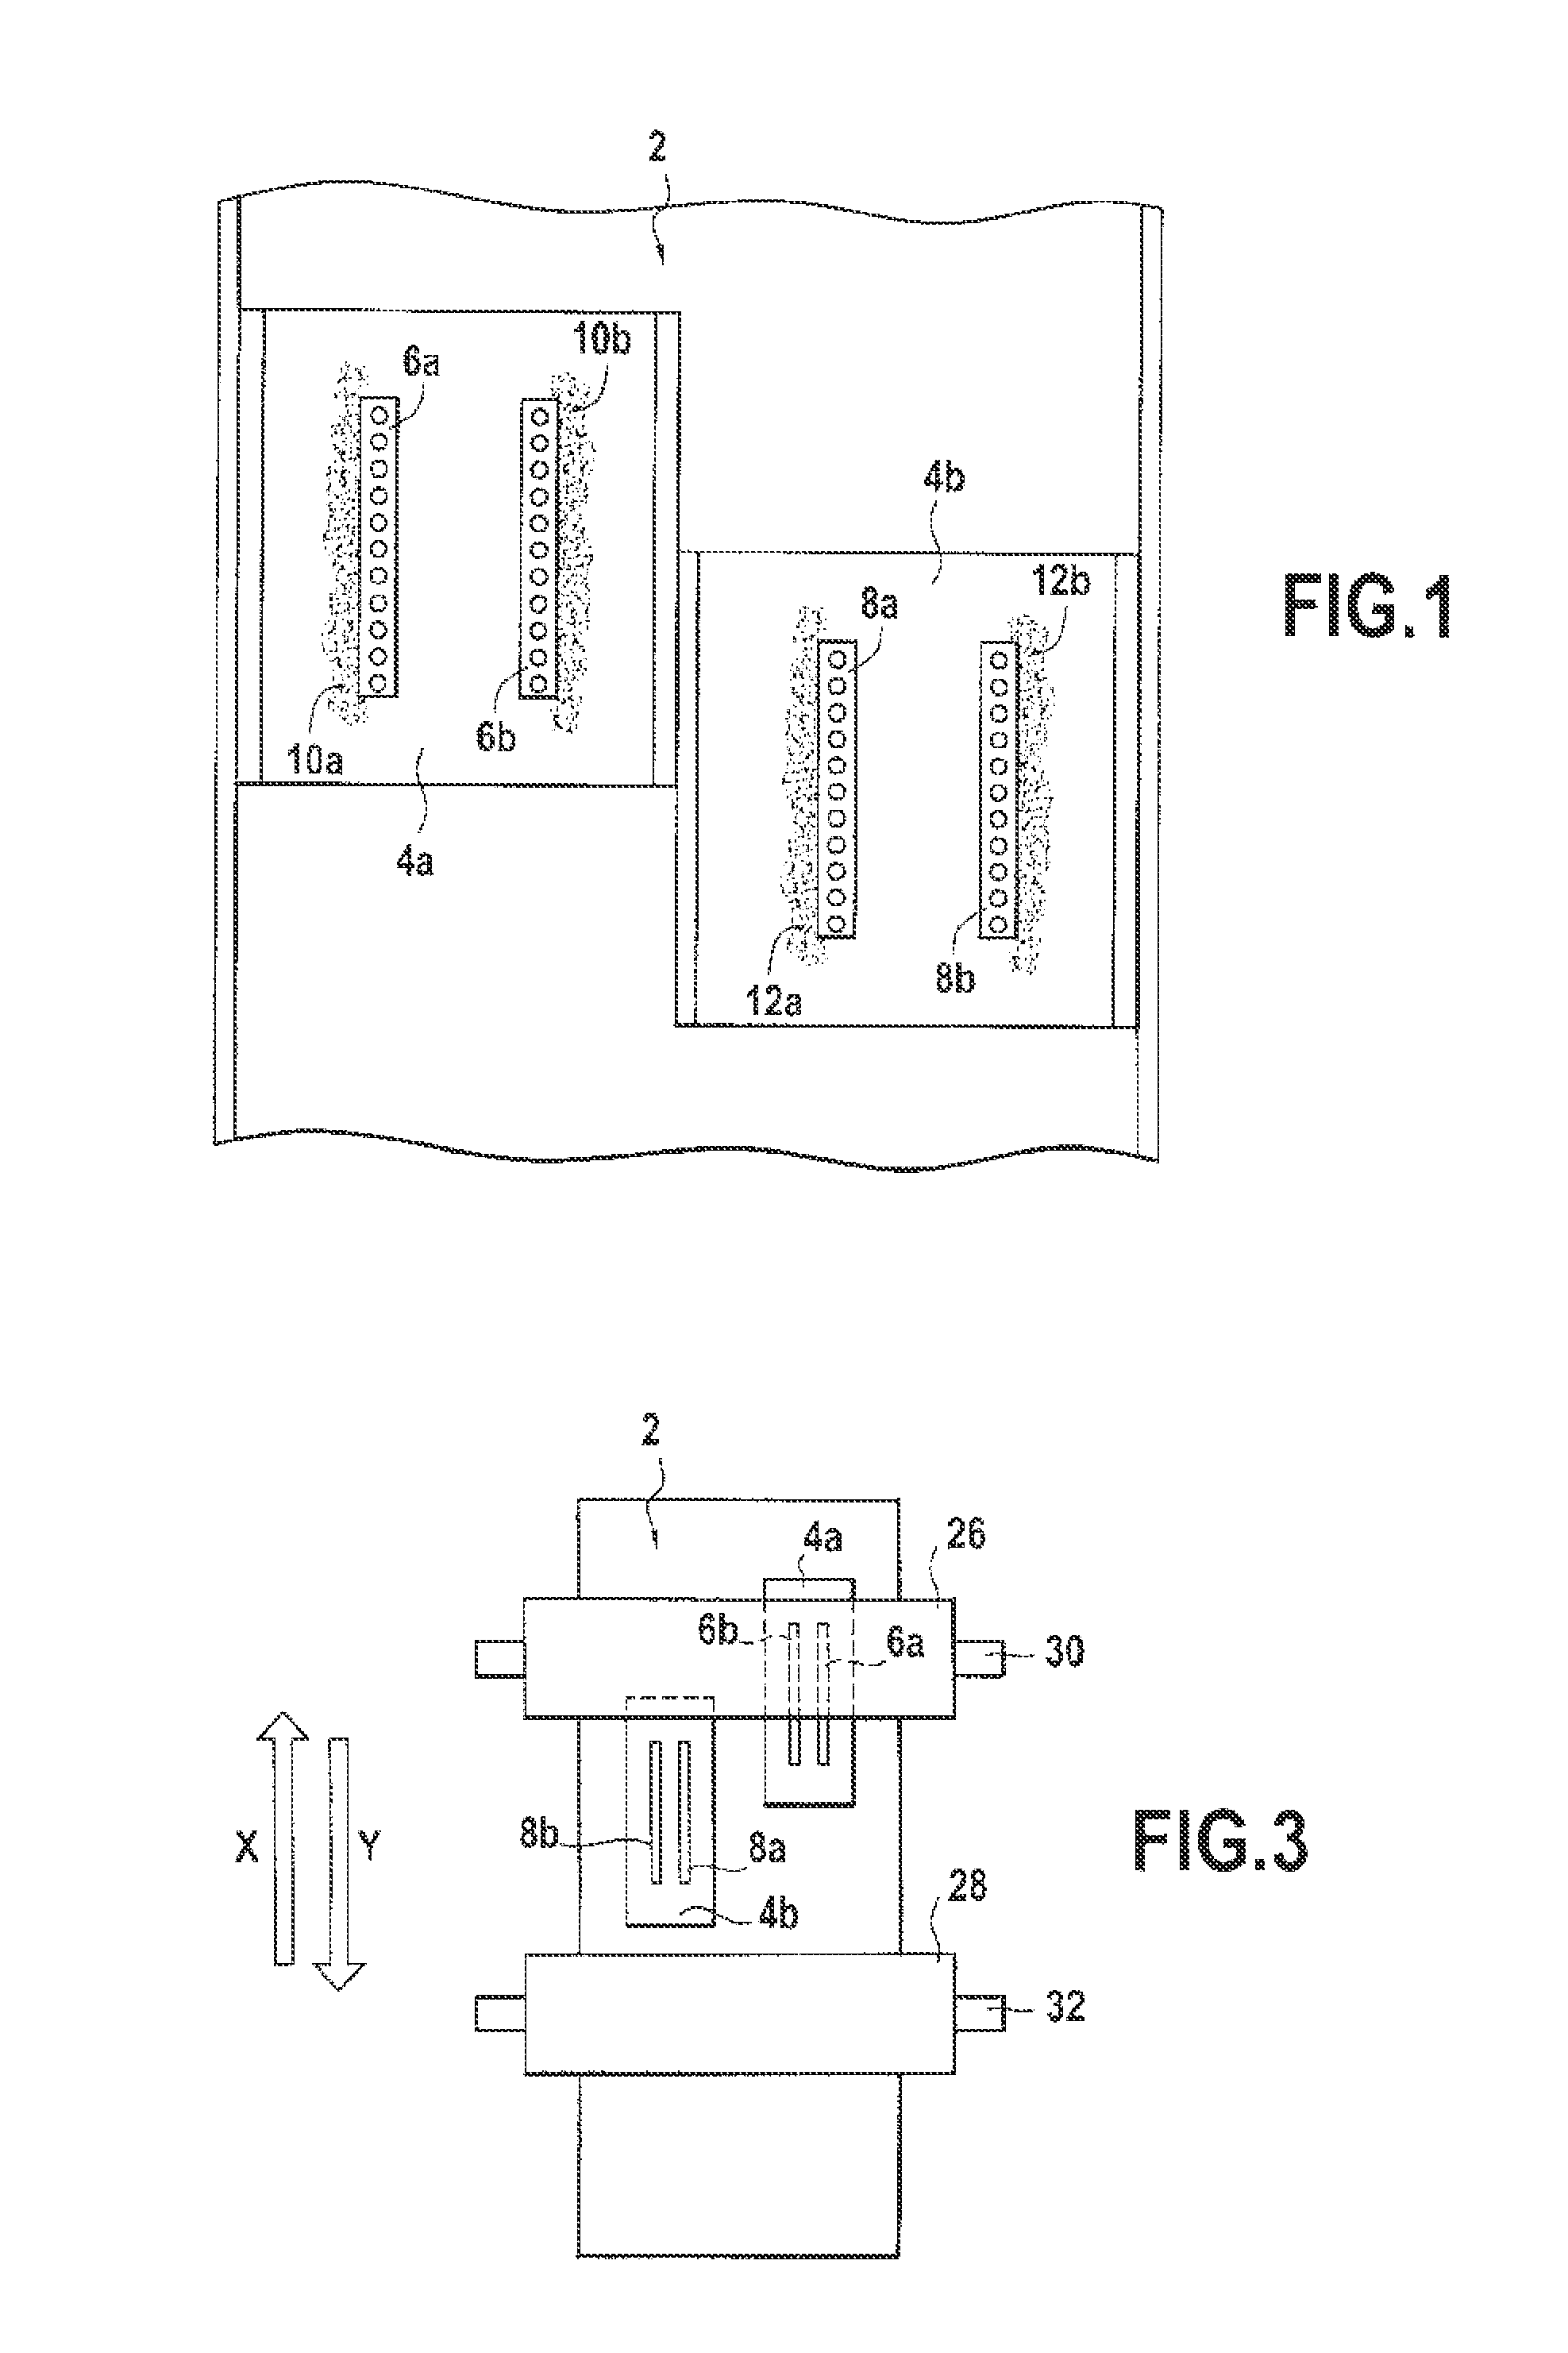 Wiping device for an ink jet franking machine